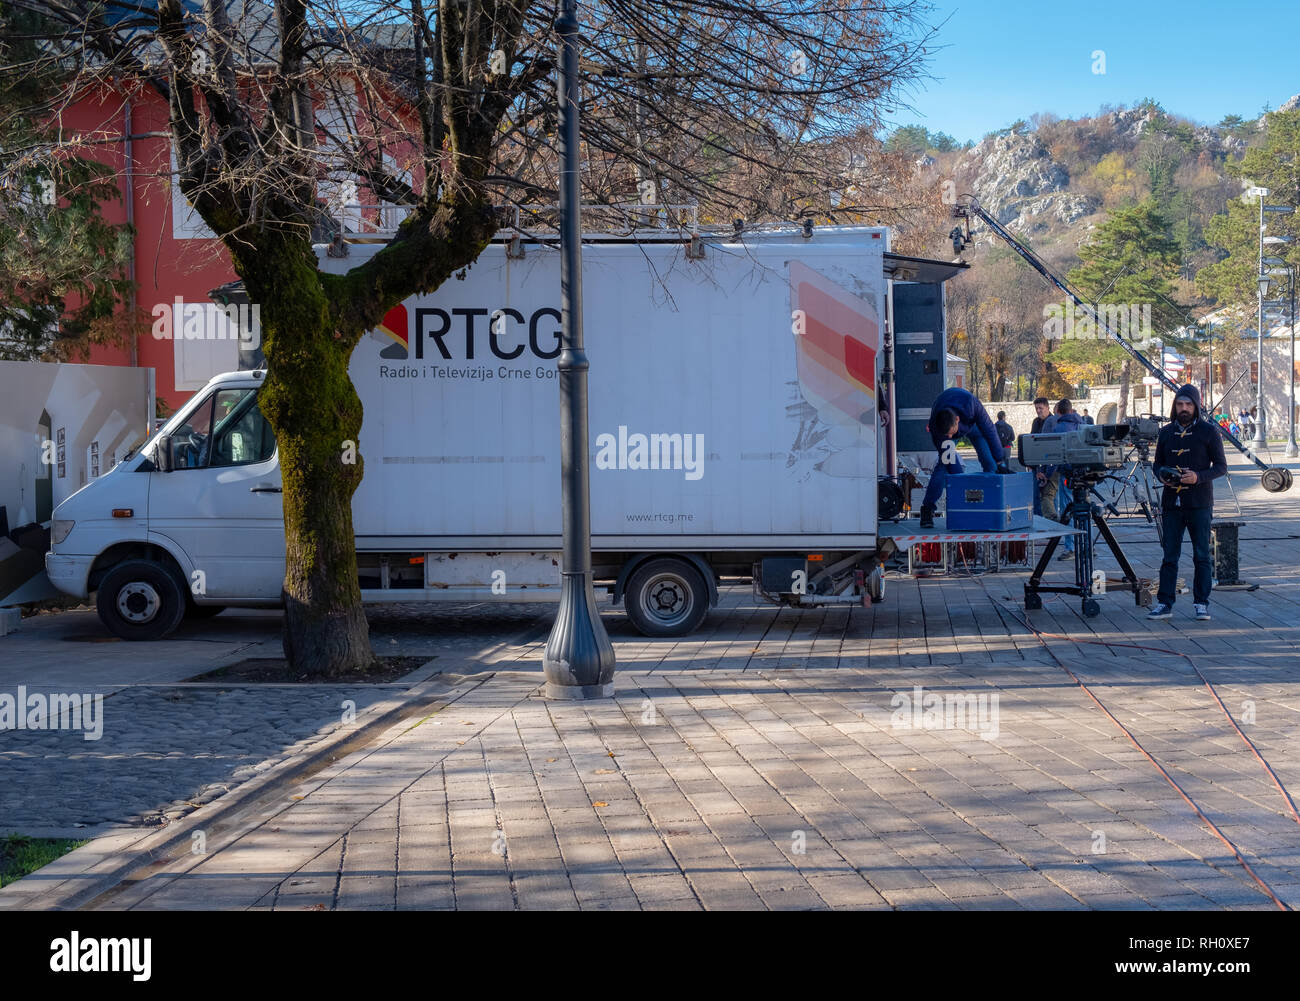 Truck and camera crew from Radio i televizija Crne Gora (radio and television Montenegro) packing up after shooting morning show on location Stock Photo